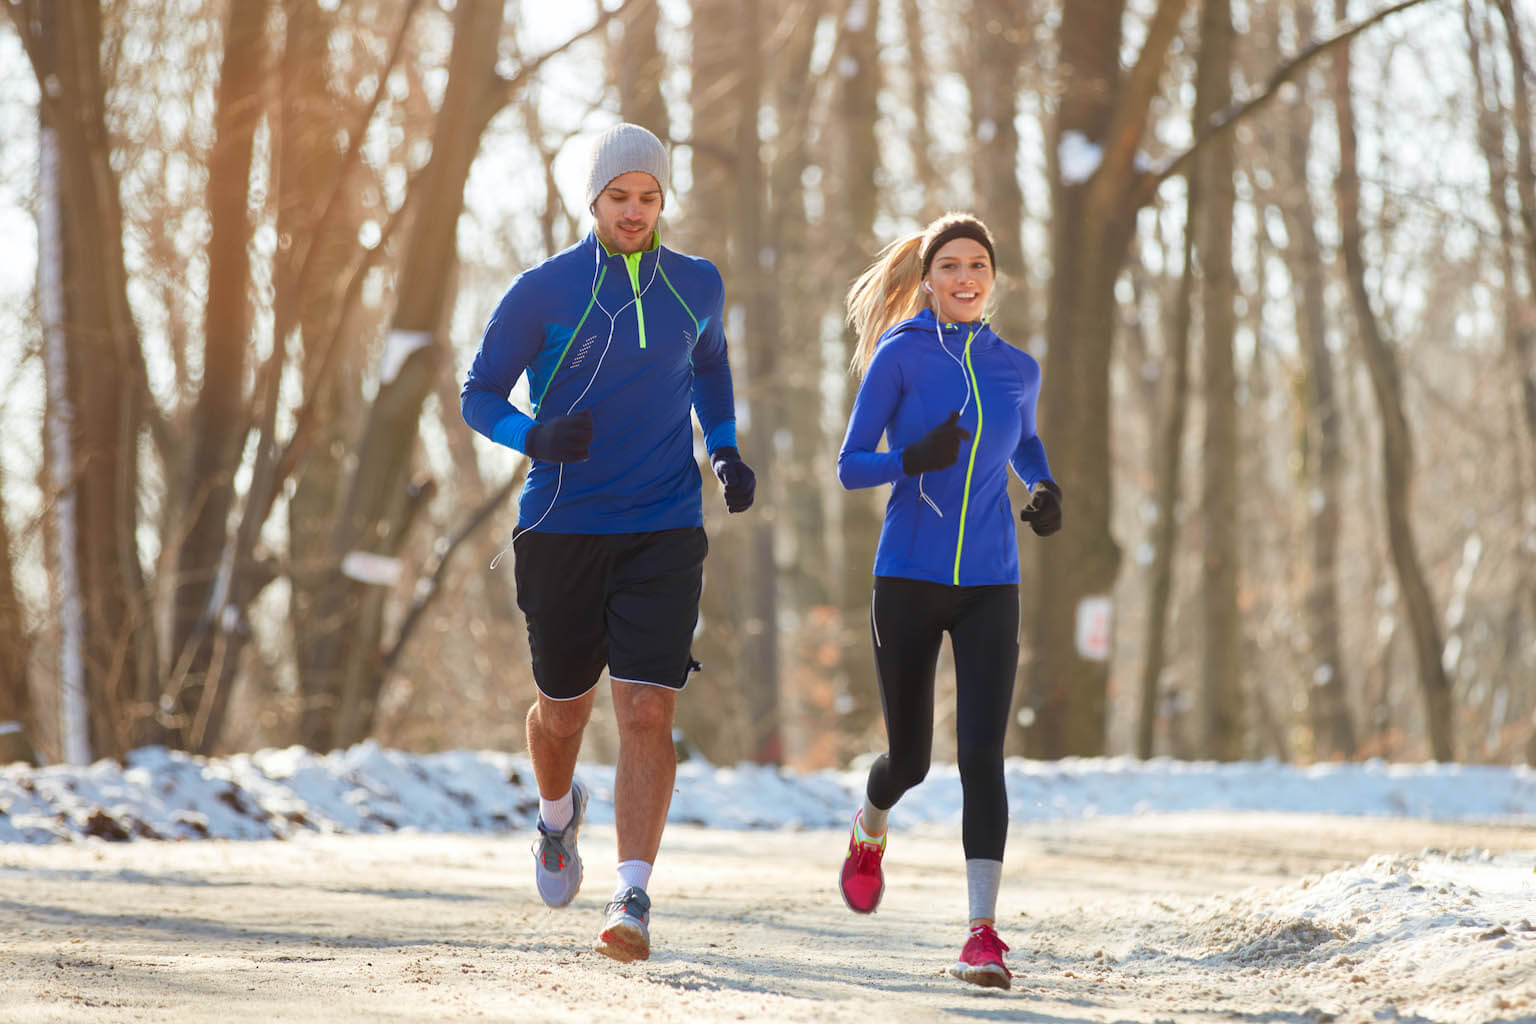 A man and a woman are jogging on a snow-lined path in a wooded area, wearing blue athletic gear and gloves.